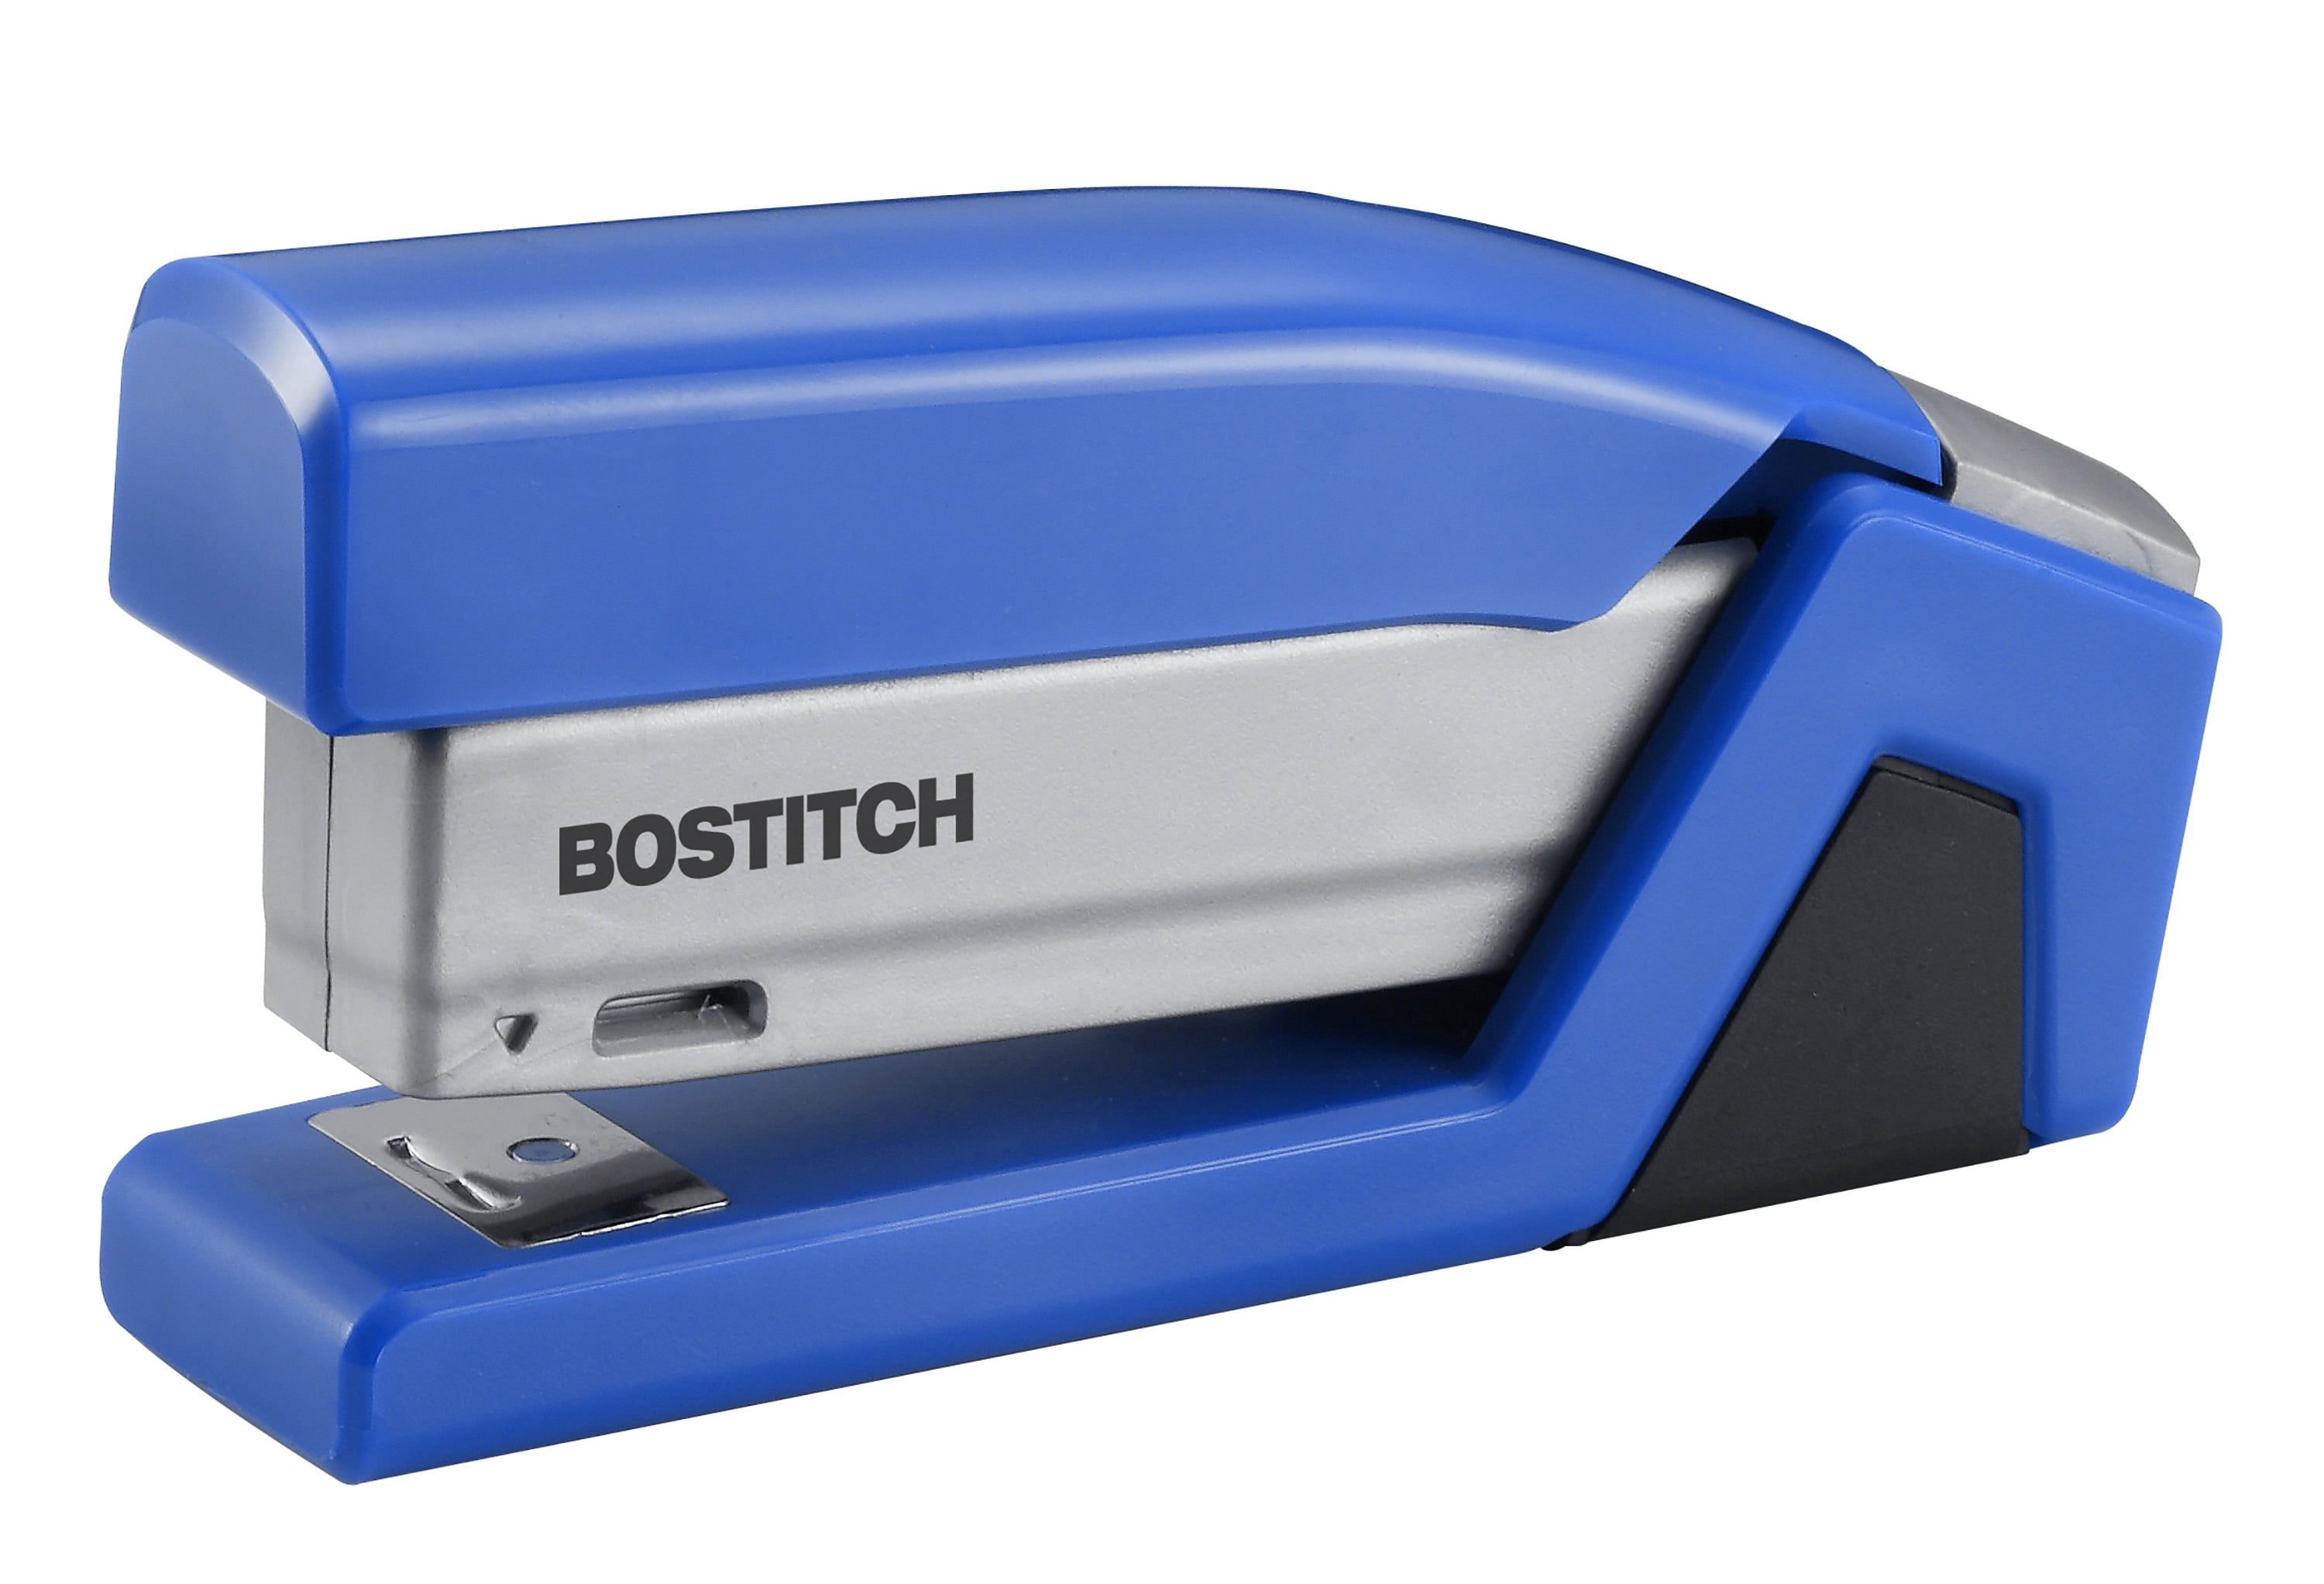 Bostitch® InJoy Spring-Powered Compact Stapler, 20-Sheet Capacity